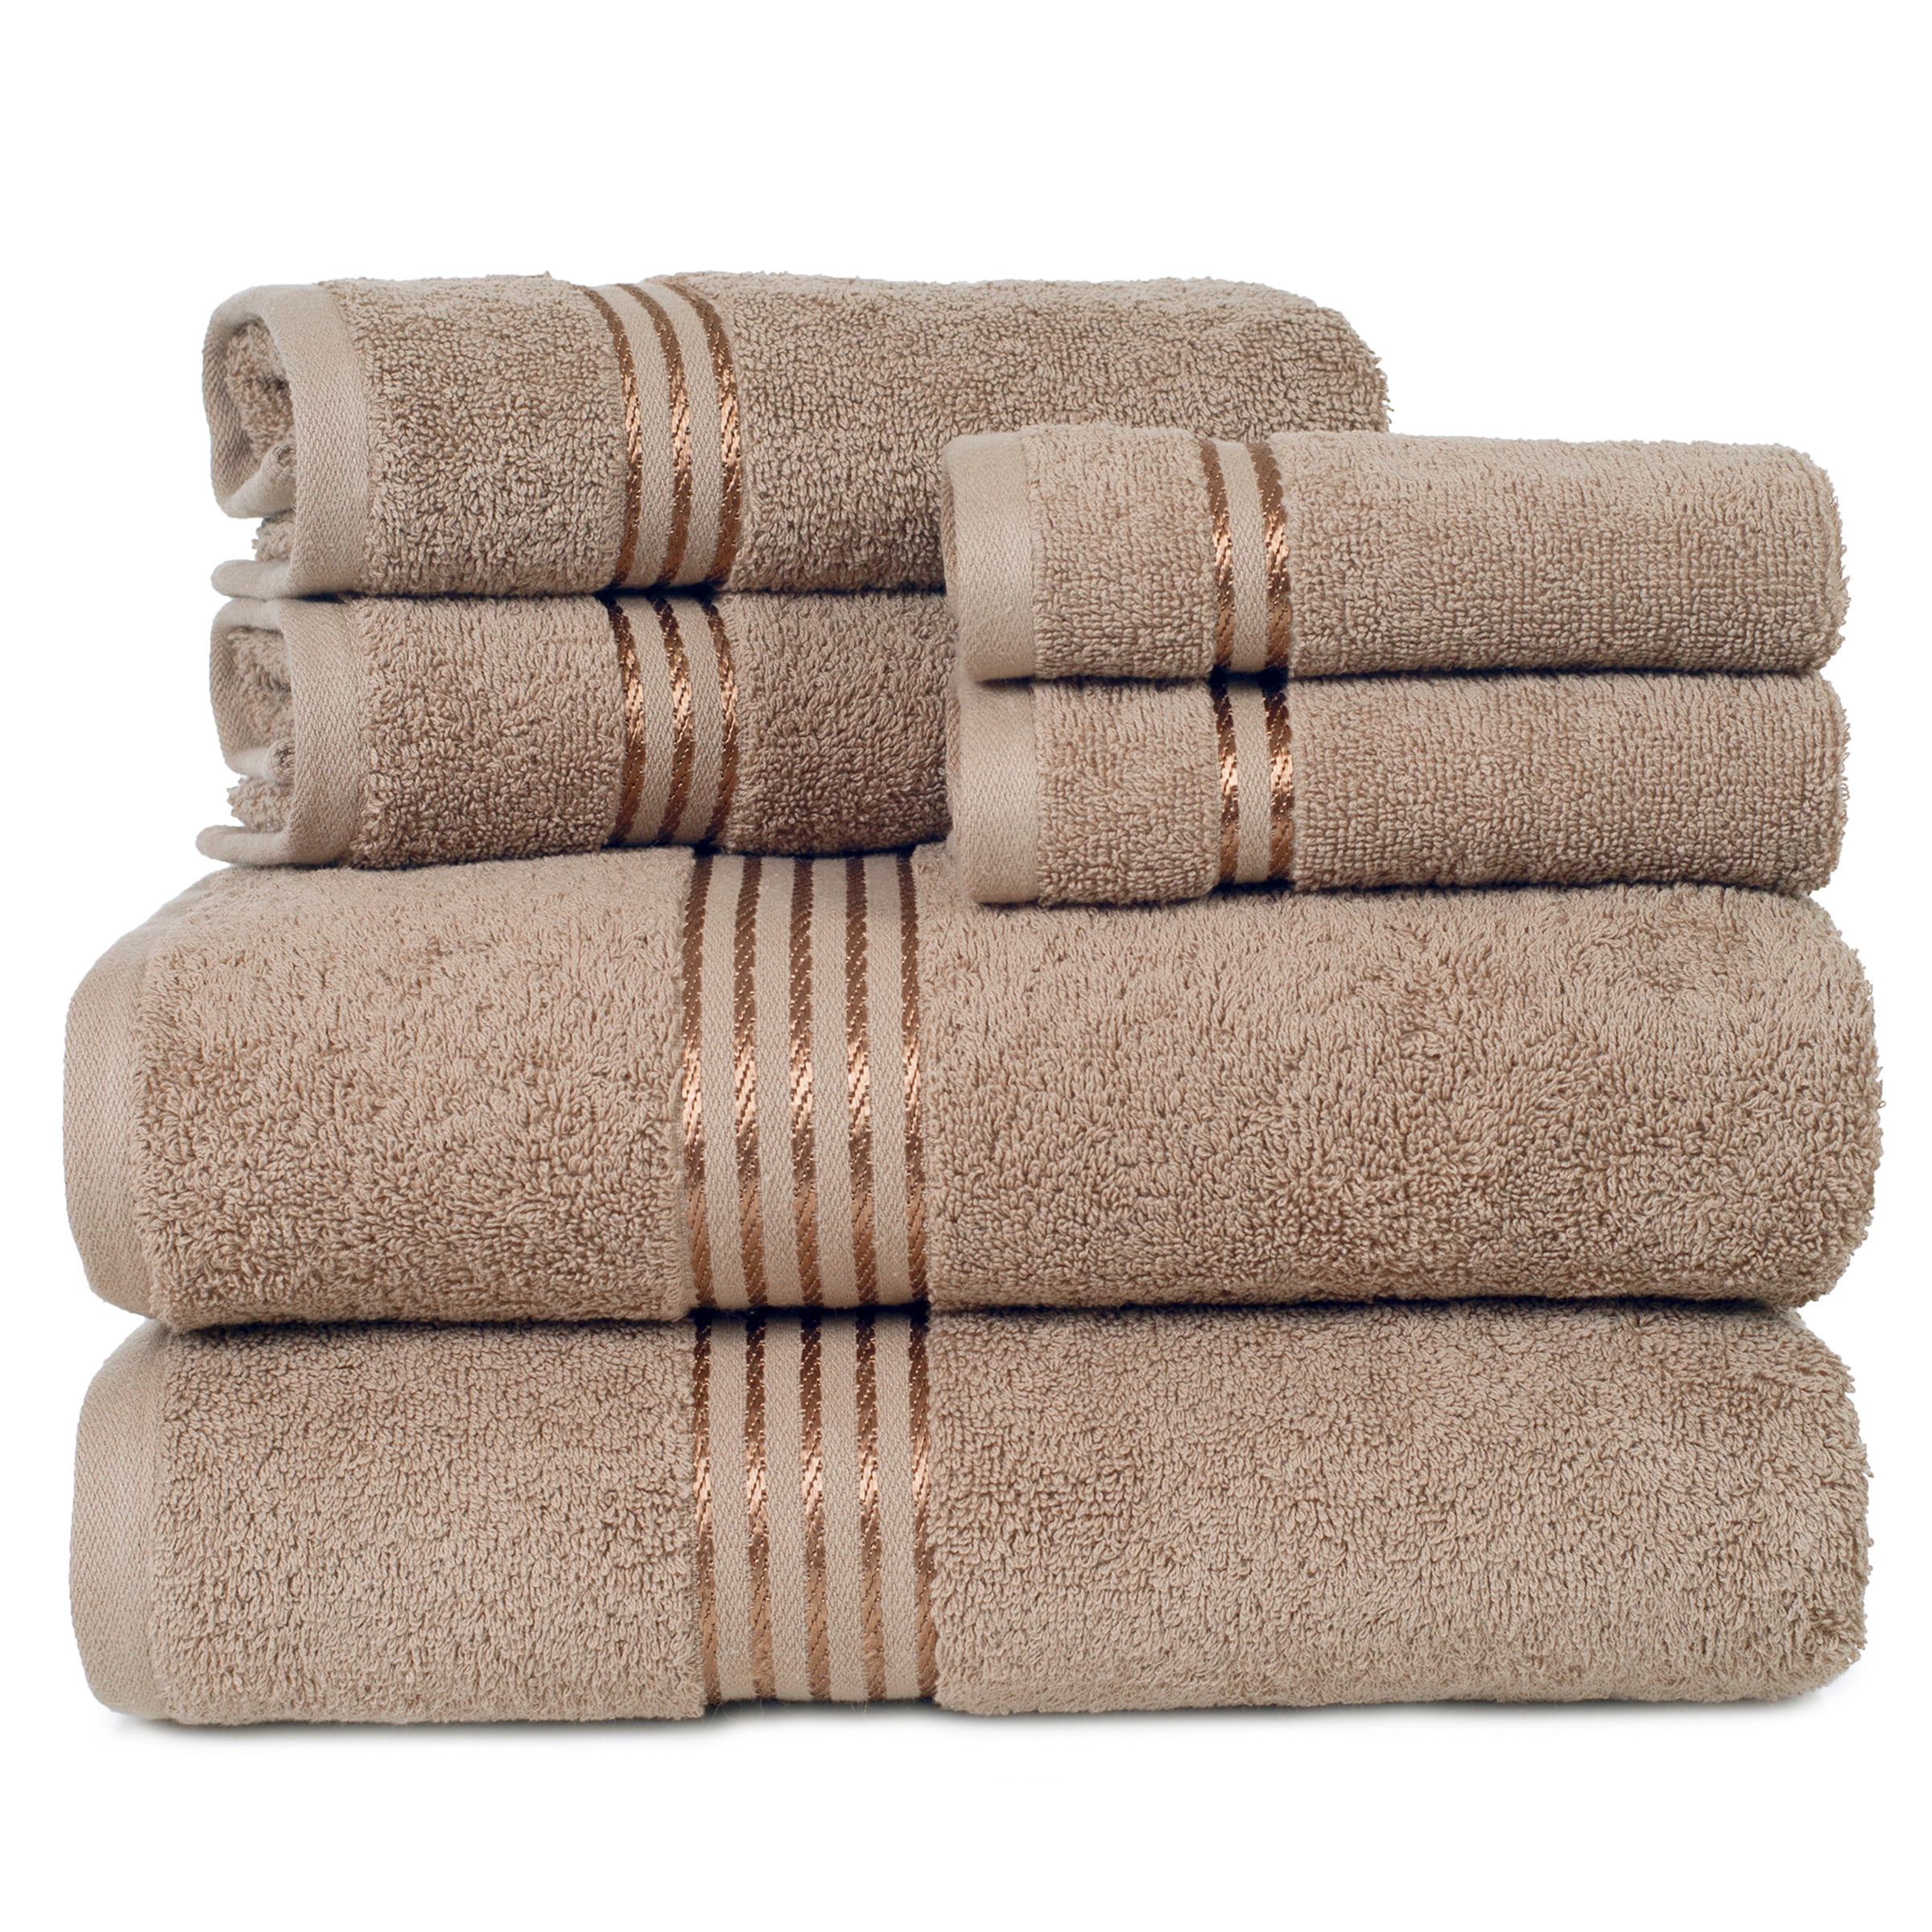 Timberlake Lavish Home 6-Piece Quick Dry Towel Set in Silver